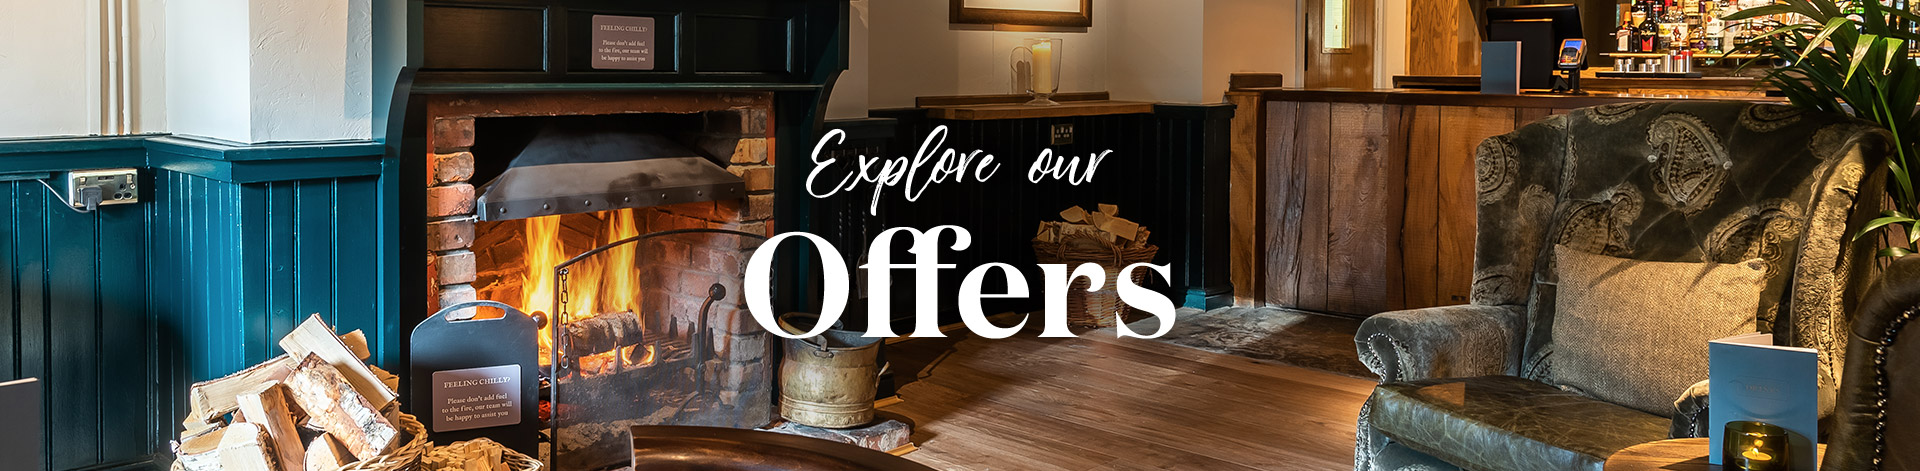 Our latest offers at The Bay Horse